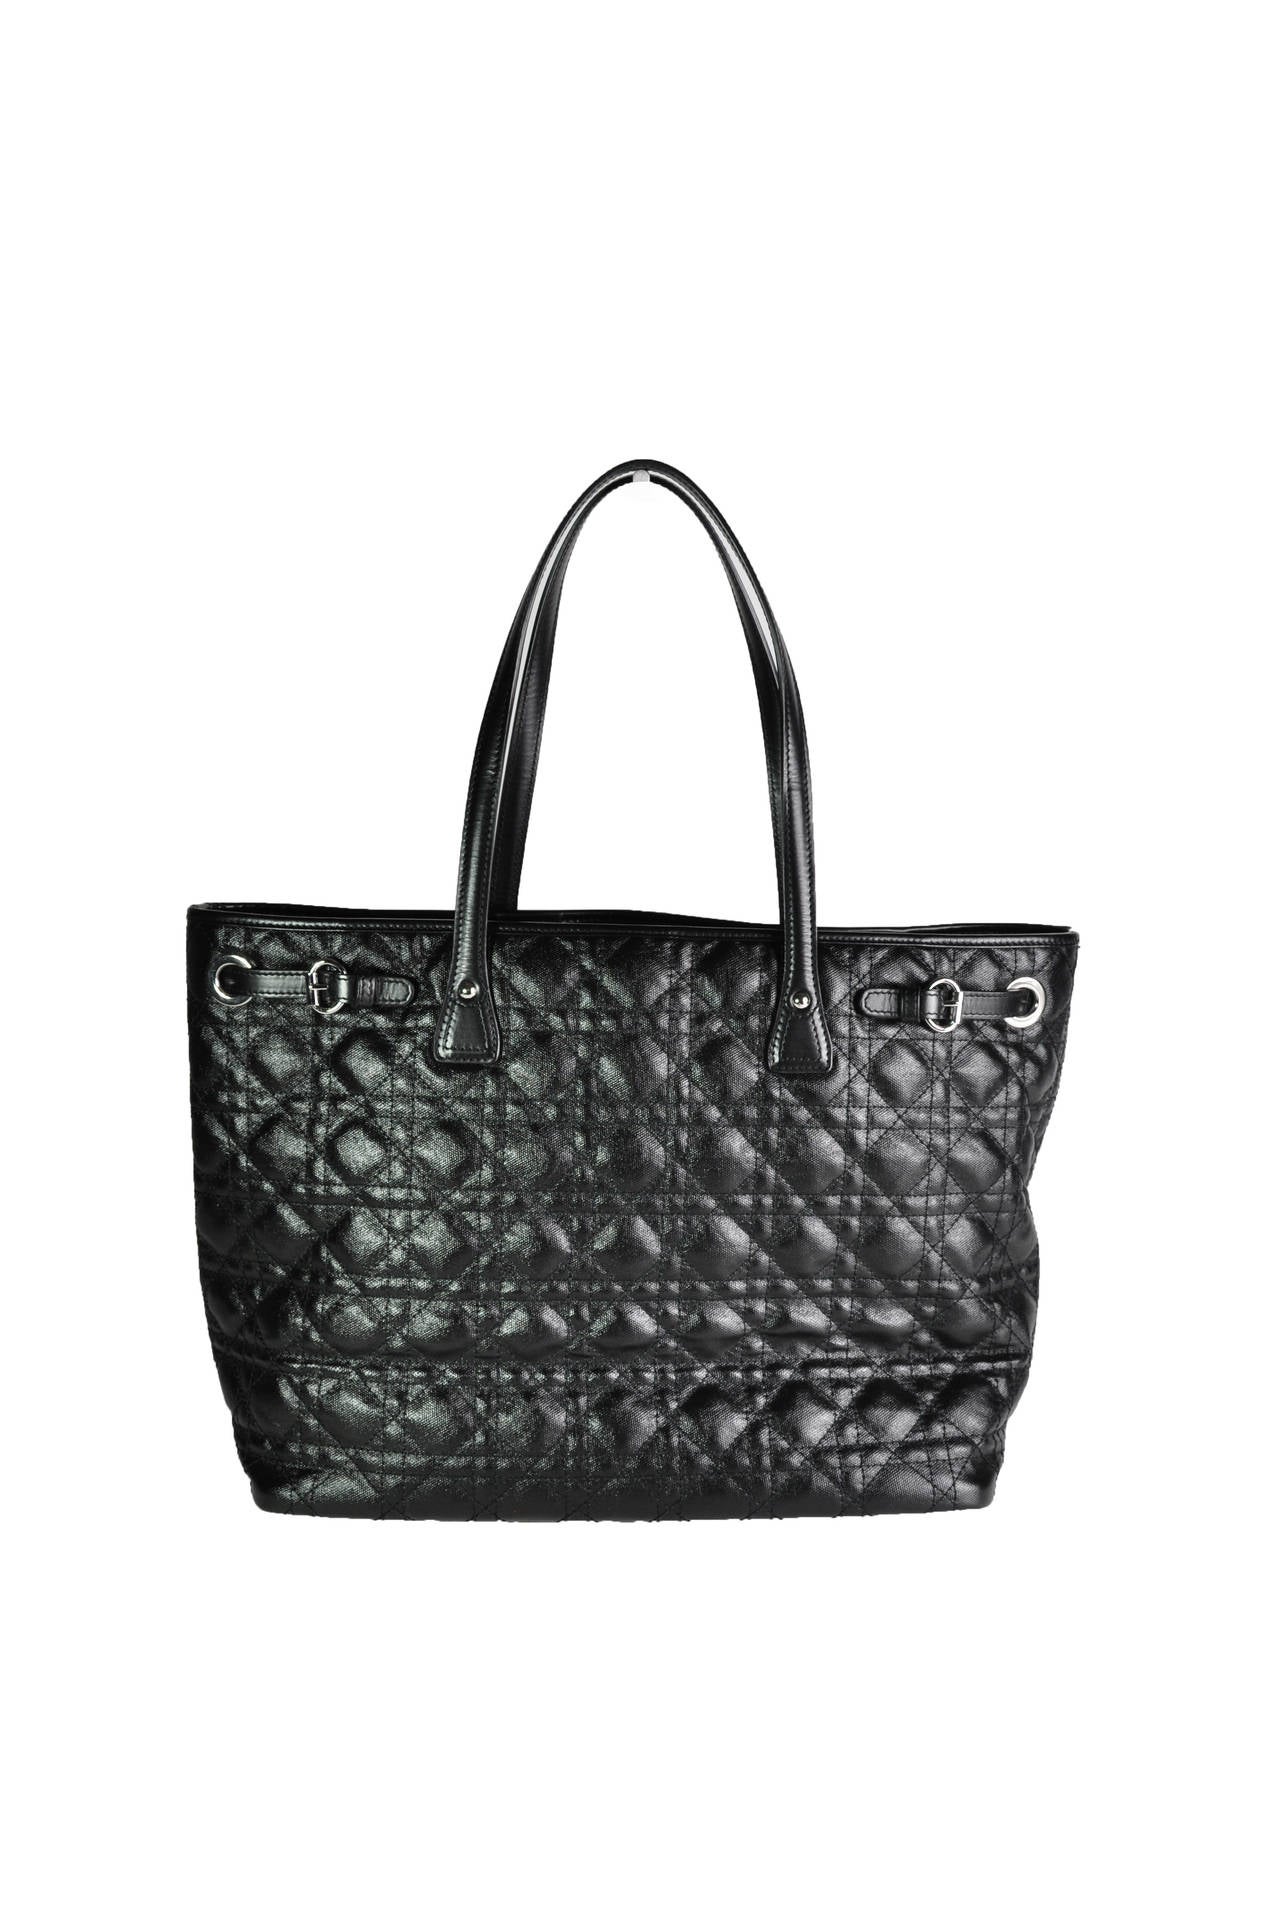 This silver toned Dior Panarea tote bag is in textured coated canvas with leather trim. It has a 